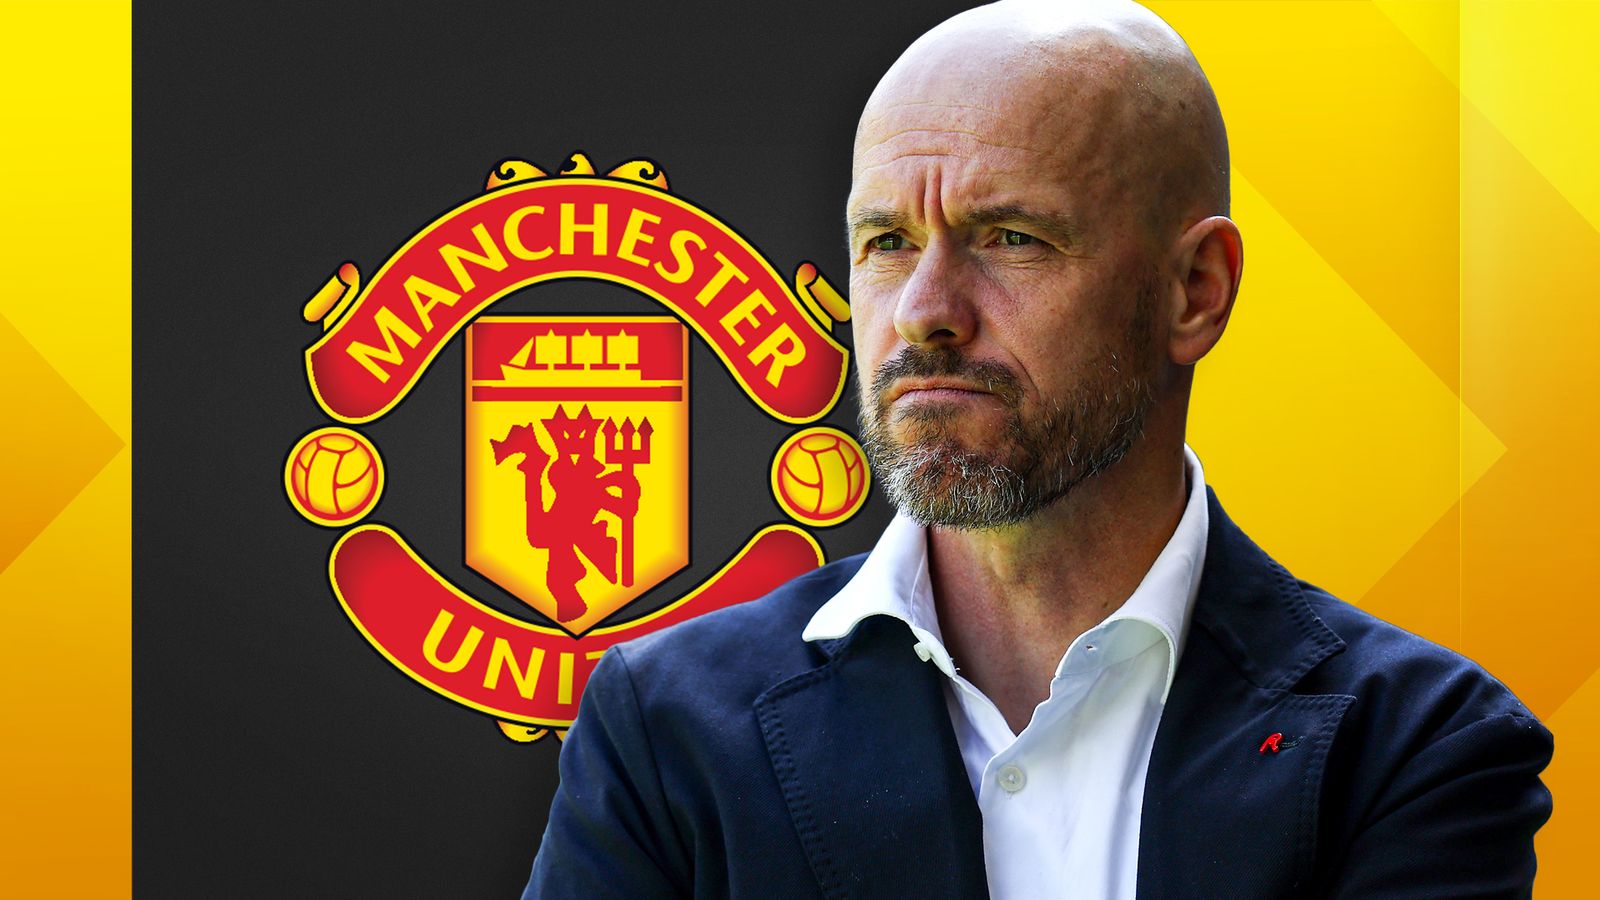 Reporter notebook: Are Manchester United now back under Erik ten Hag?